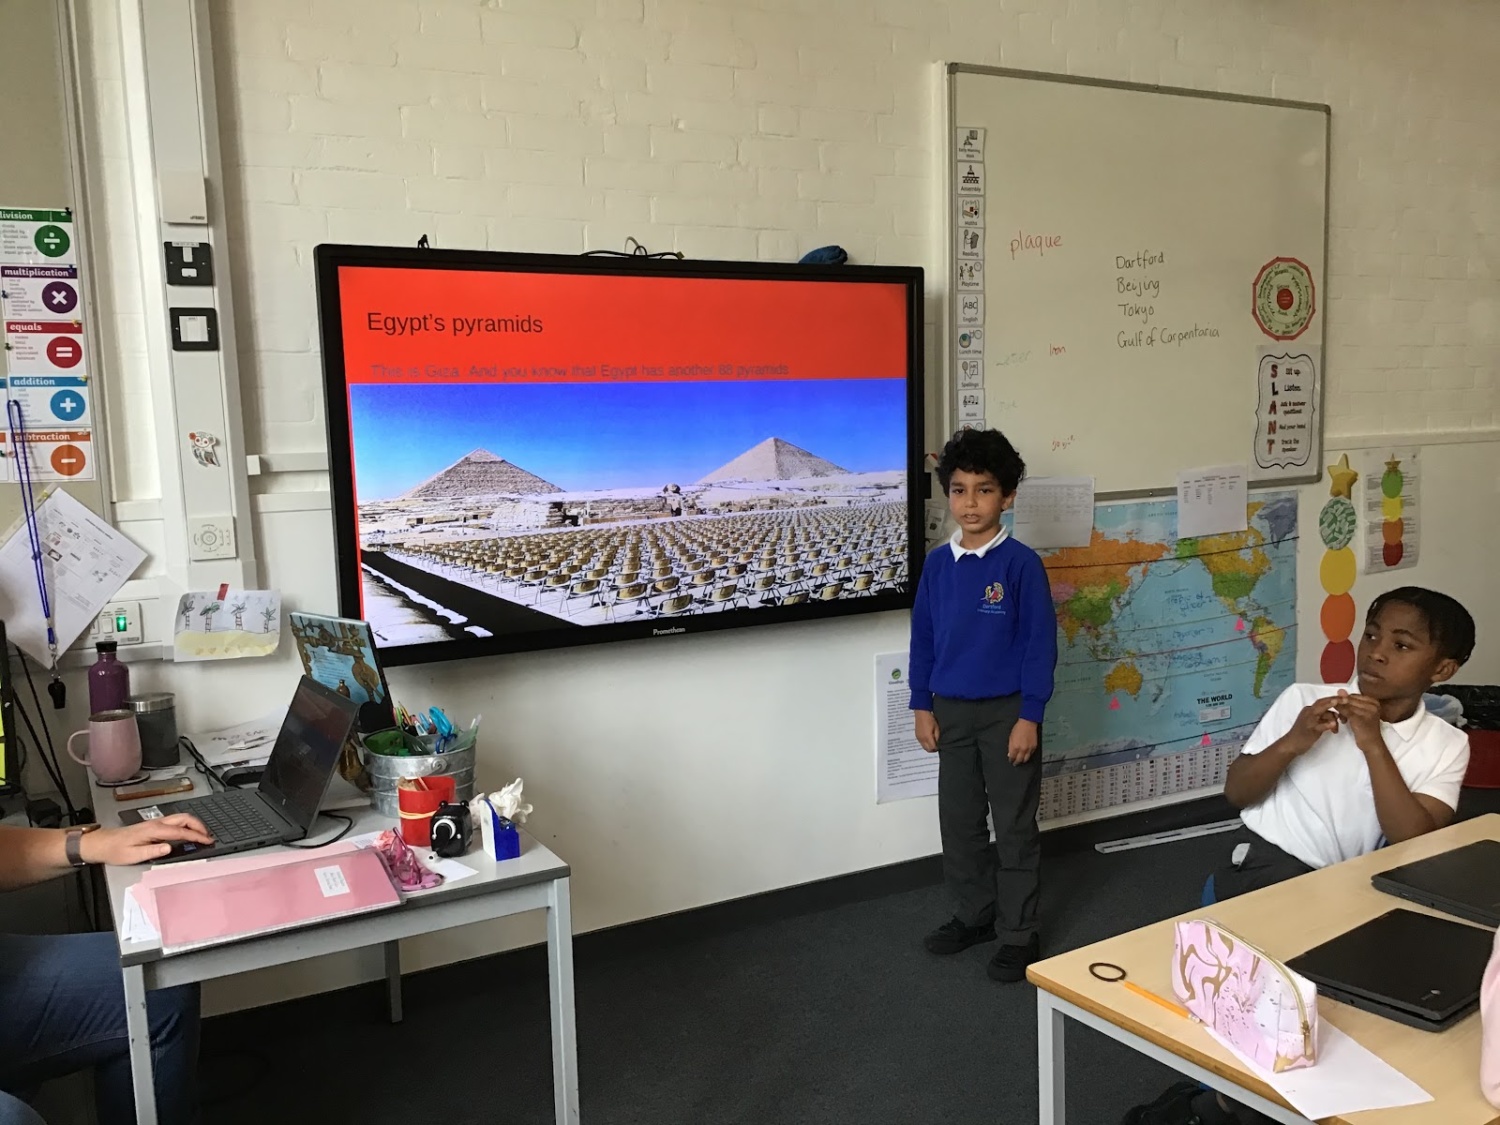 A young boy in academy uniform is pictured standing beside an Interactive Board at the front of the classroom, about to deliver a presentation on Egypt's Pyramids.